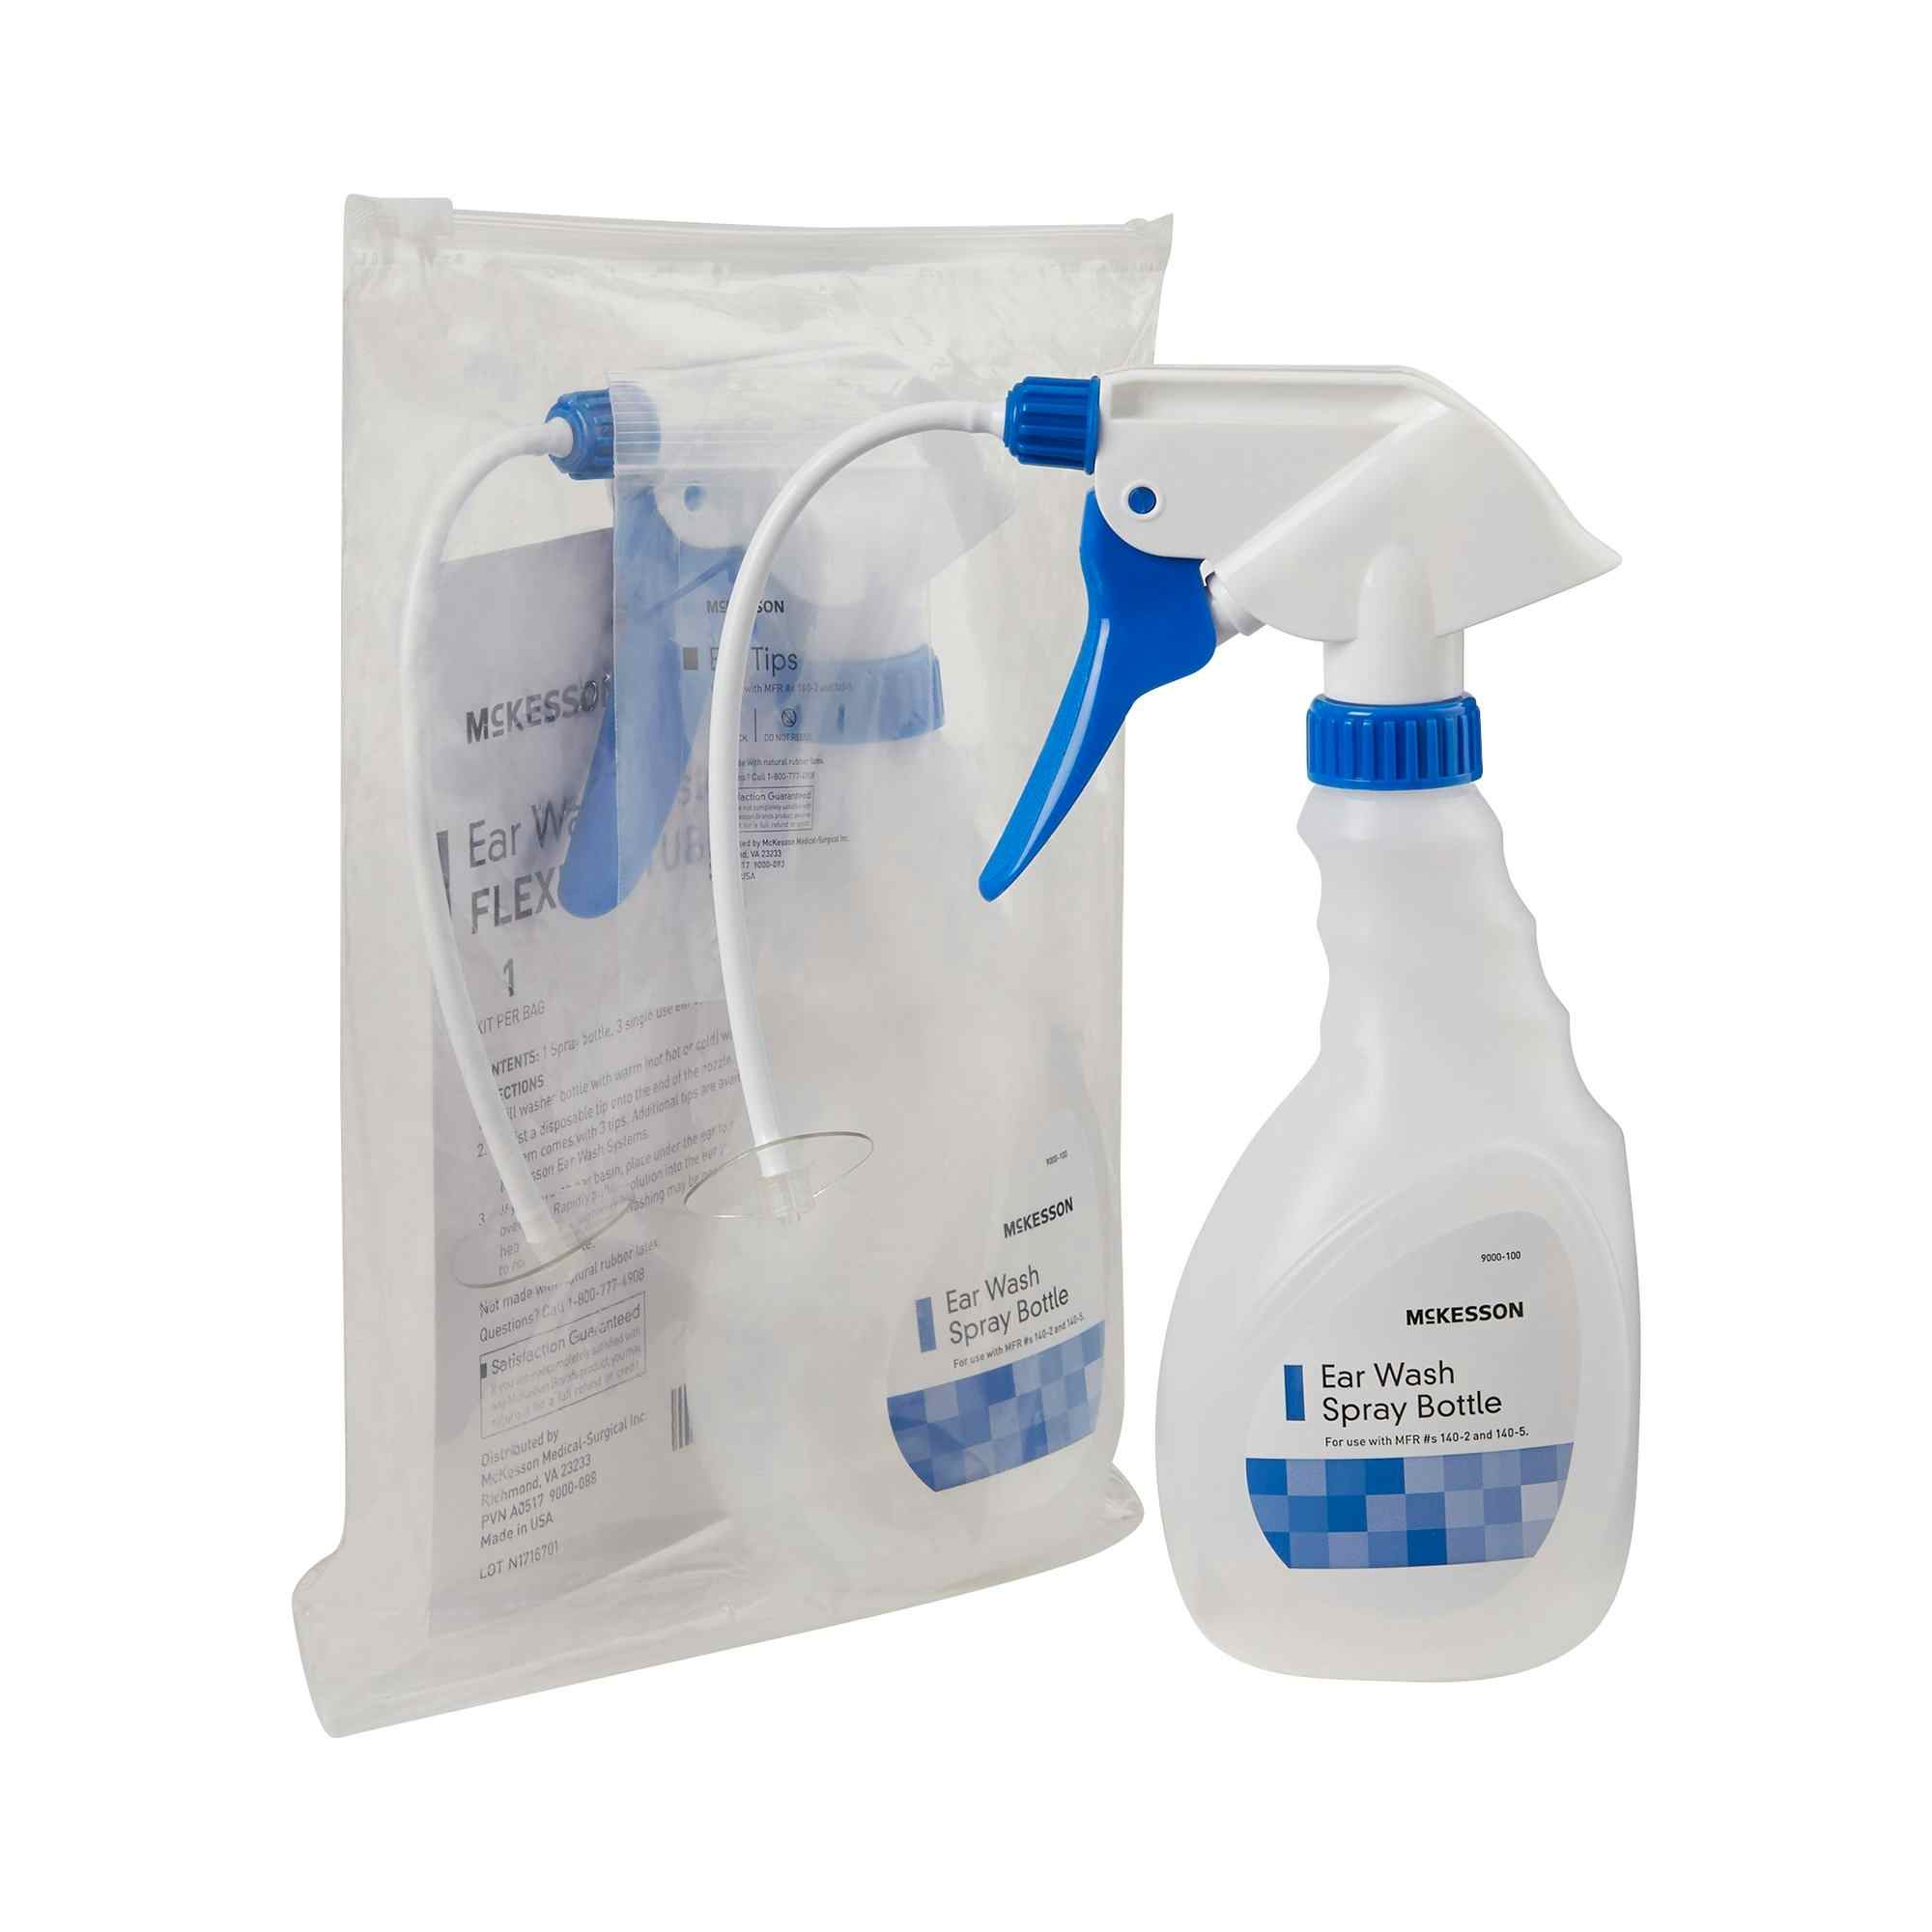 McKesson Ear Wash System, 140-2, Case of 10